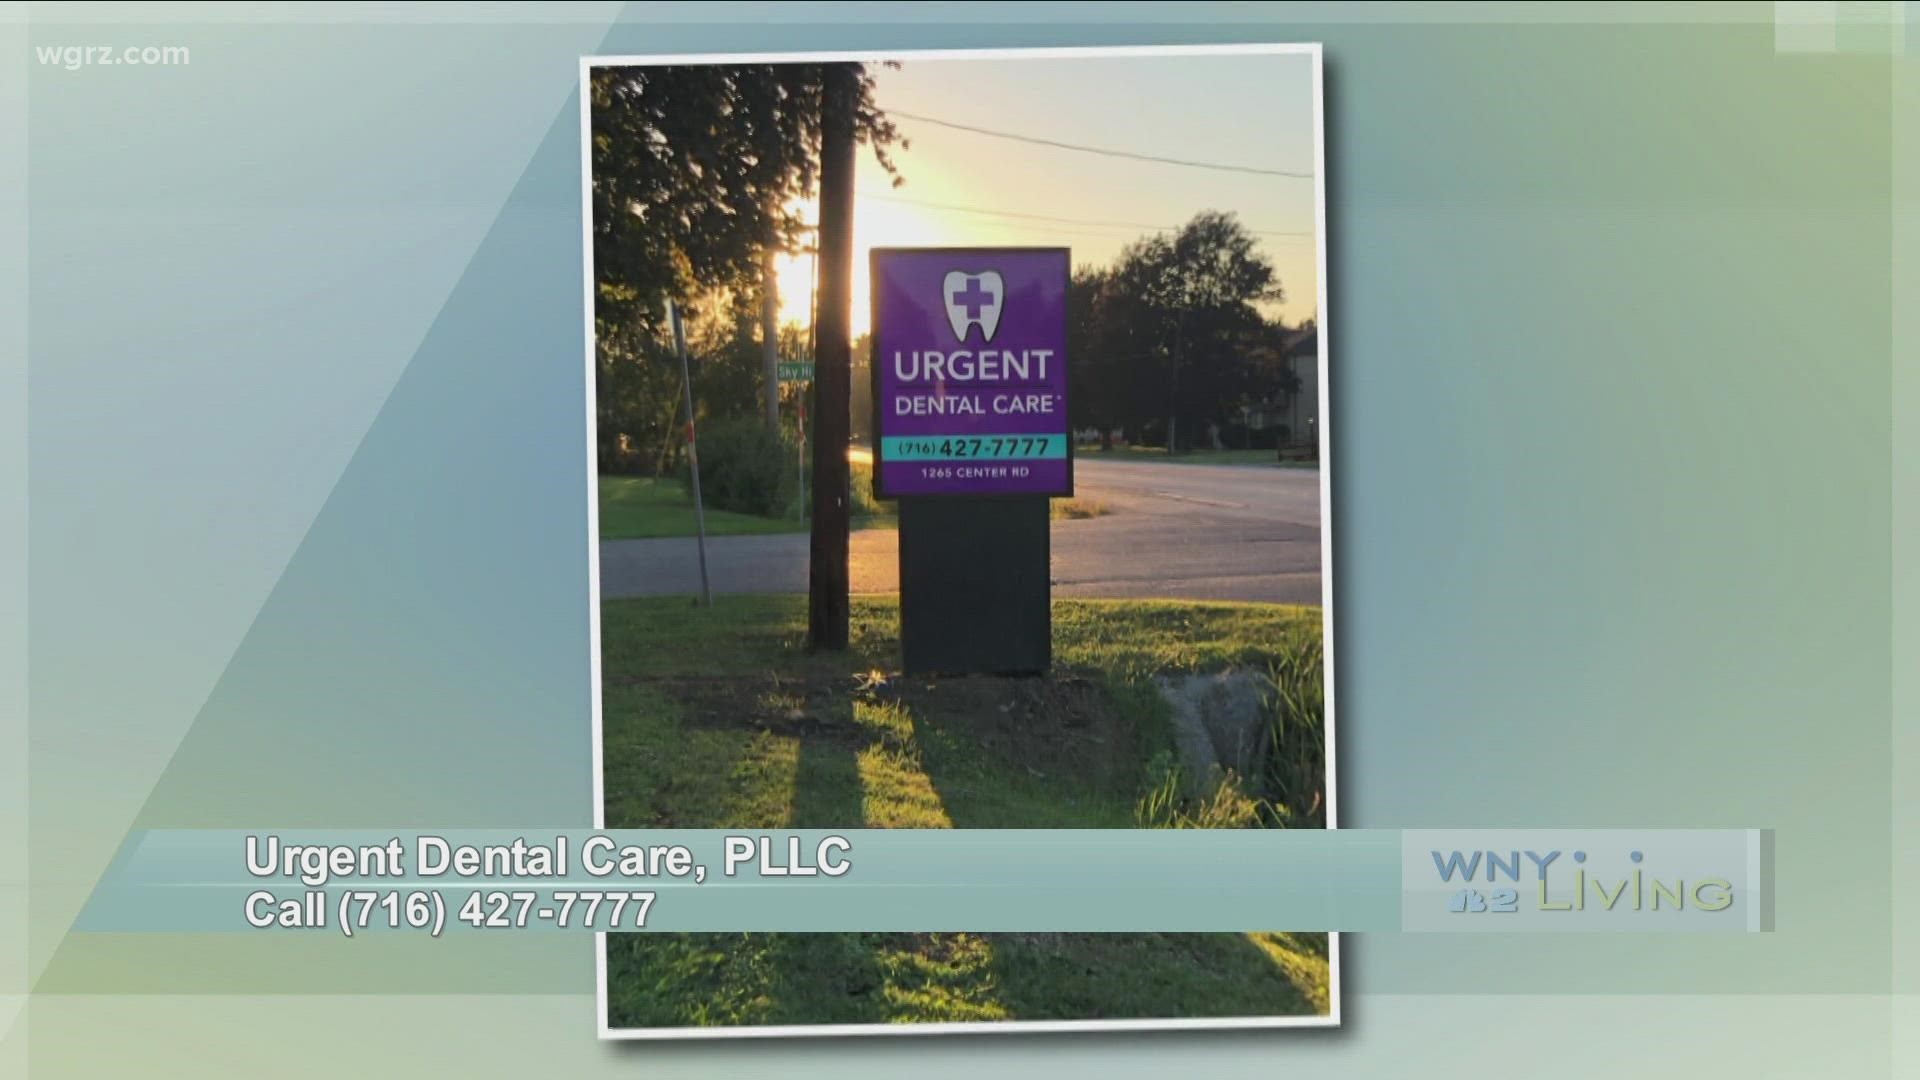 WNY Living - October 16 - Urgent Dental Care (THIS VIDEO IS SPONSORED BY URGENT DENTAL CARE)